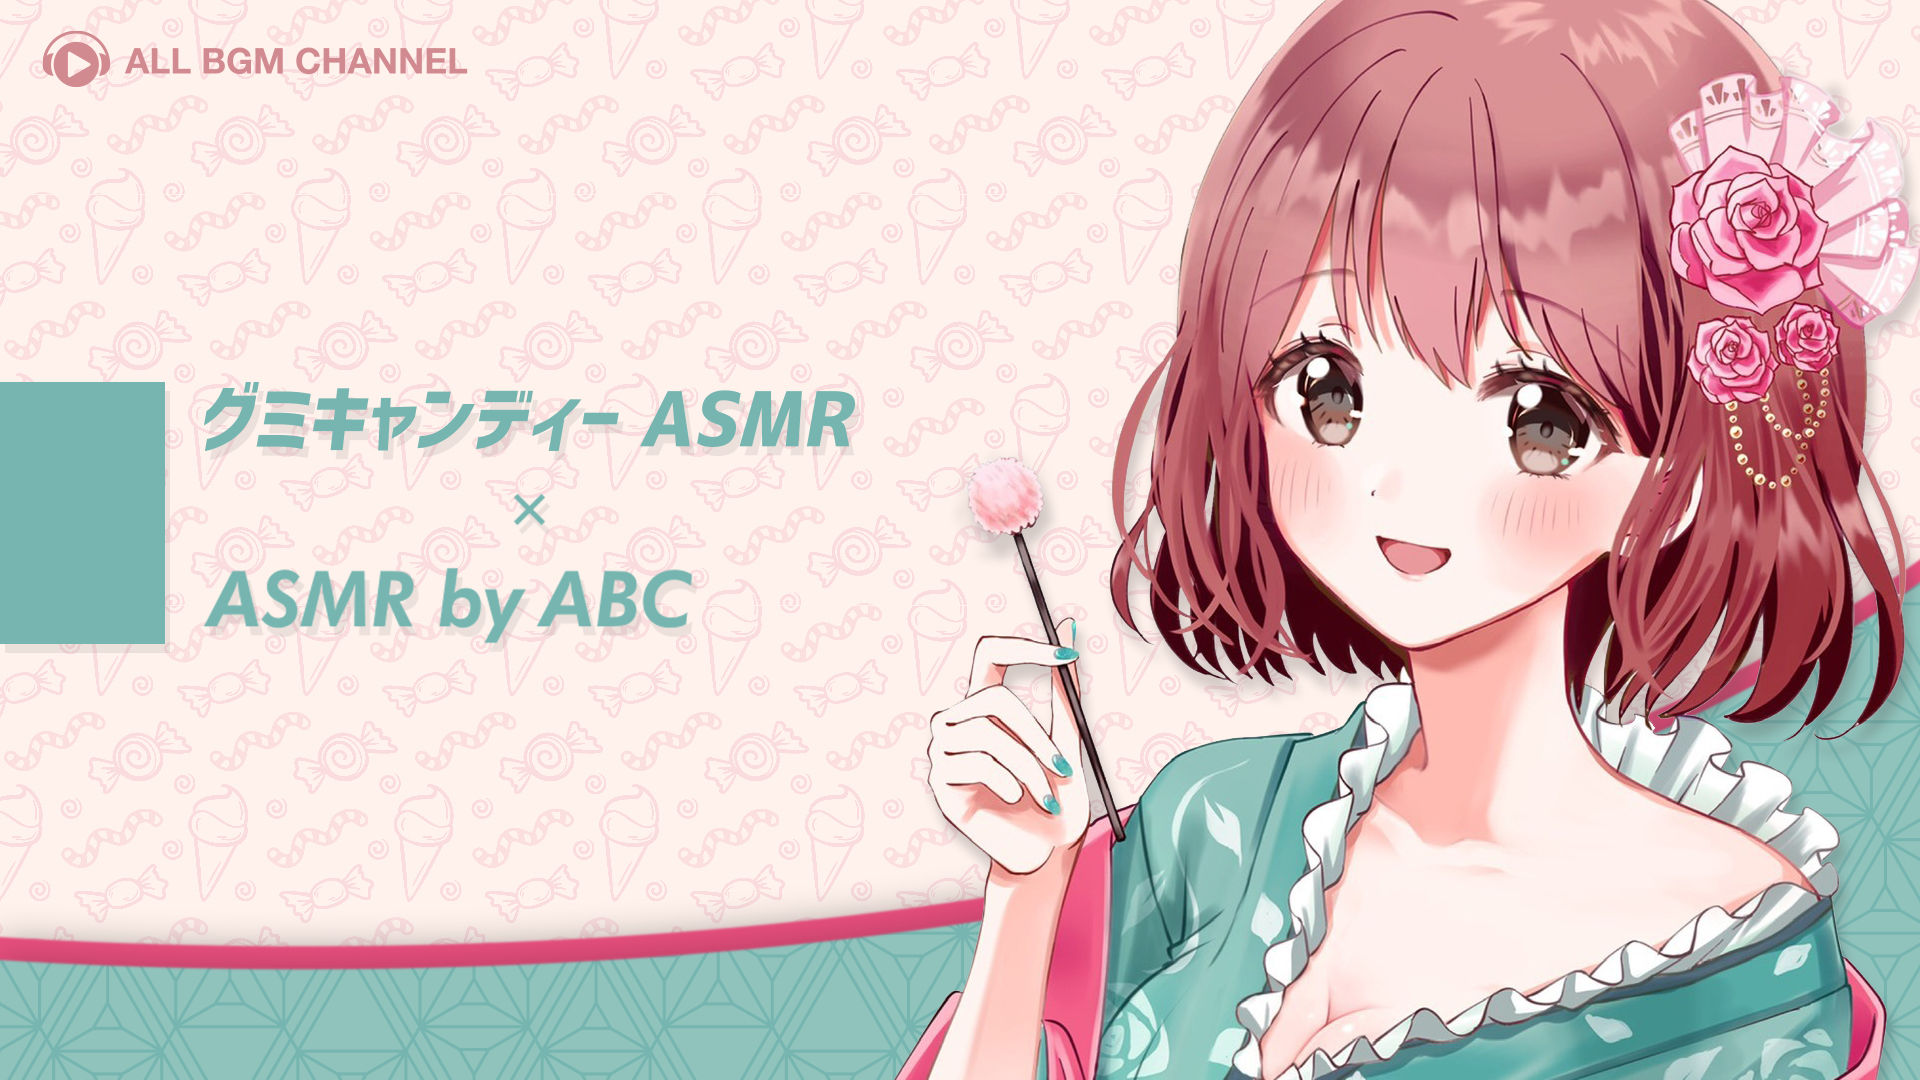 Gummycandy Asmr S Situation Voice Is Now Available On Streaming Star Music Entertainment Inc